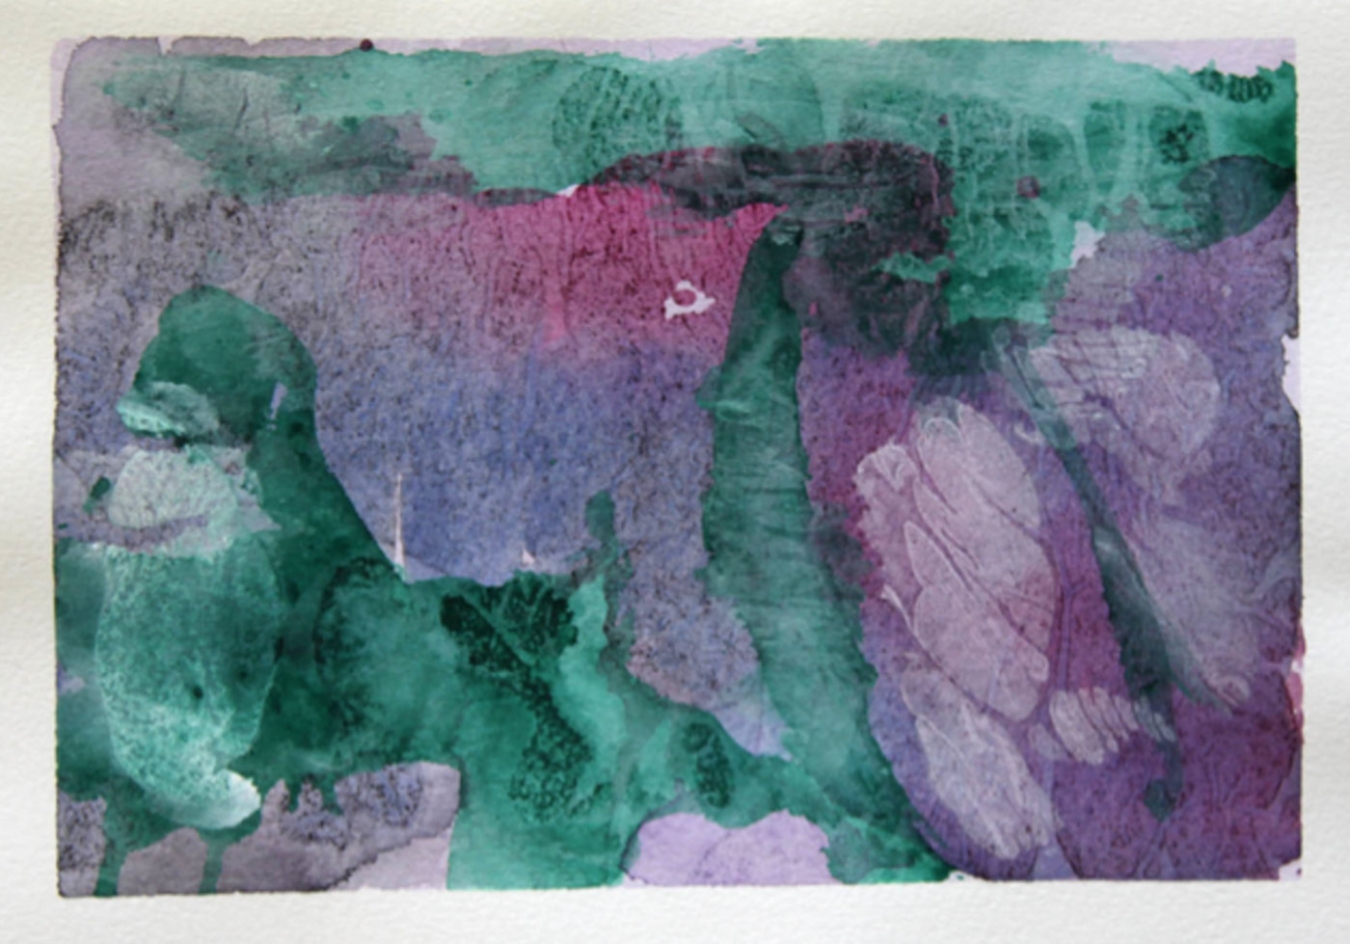 NEG Untitled, Watercolour on paper, 15 x 21cm. Copyright The Cunningham Dax Collection